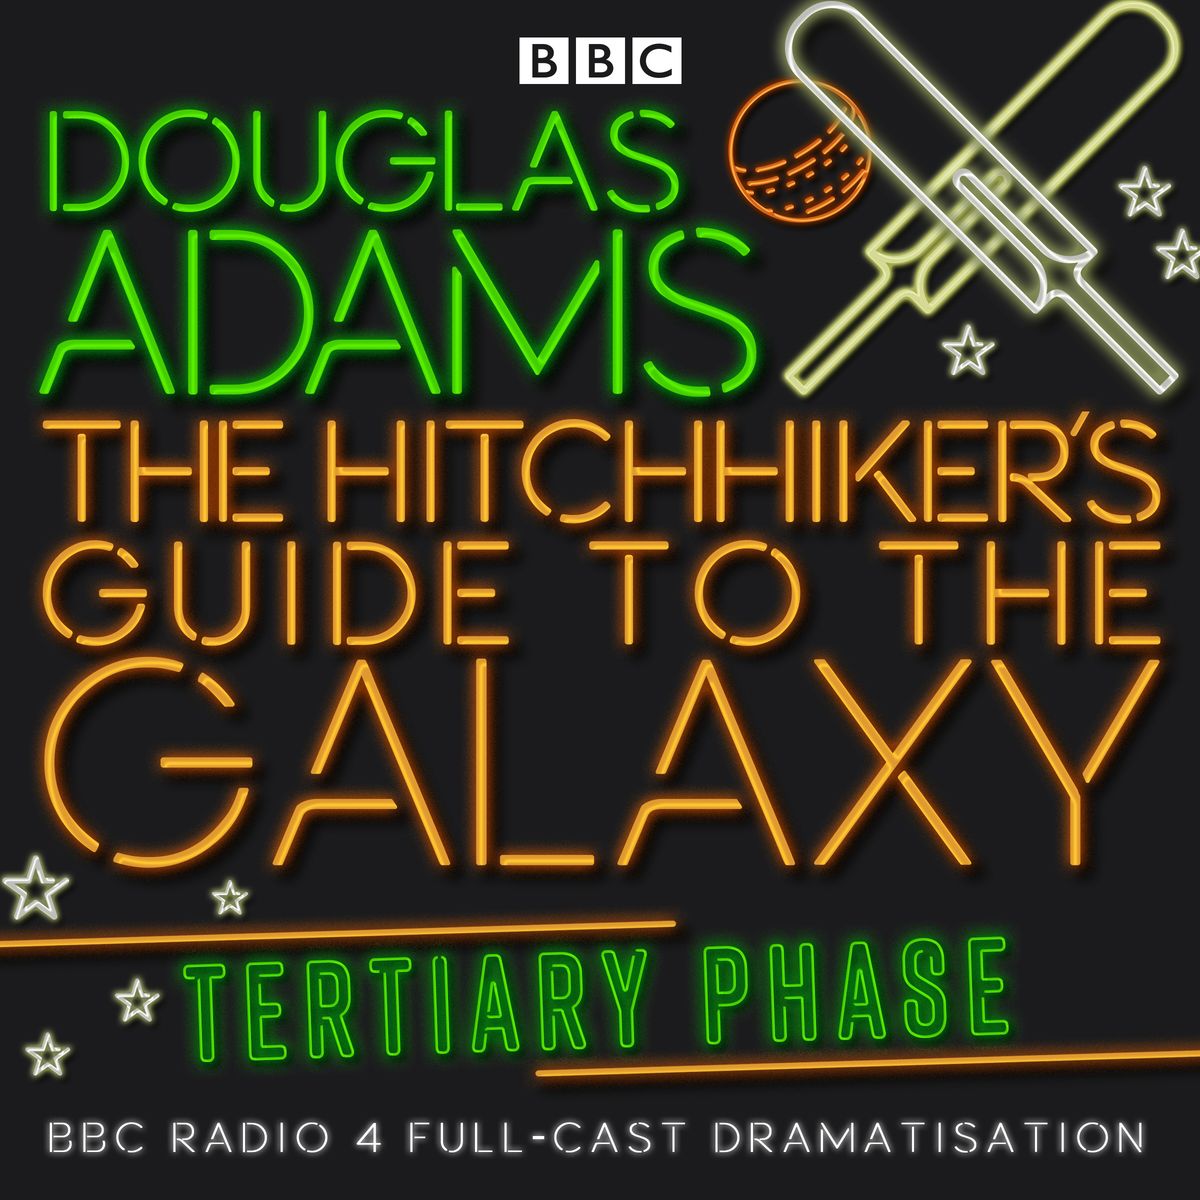 hitchhikers guide to the galaxy audio book torrent